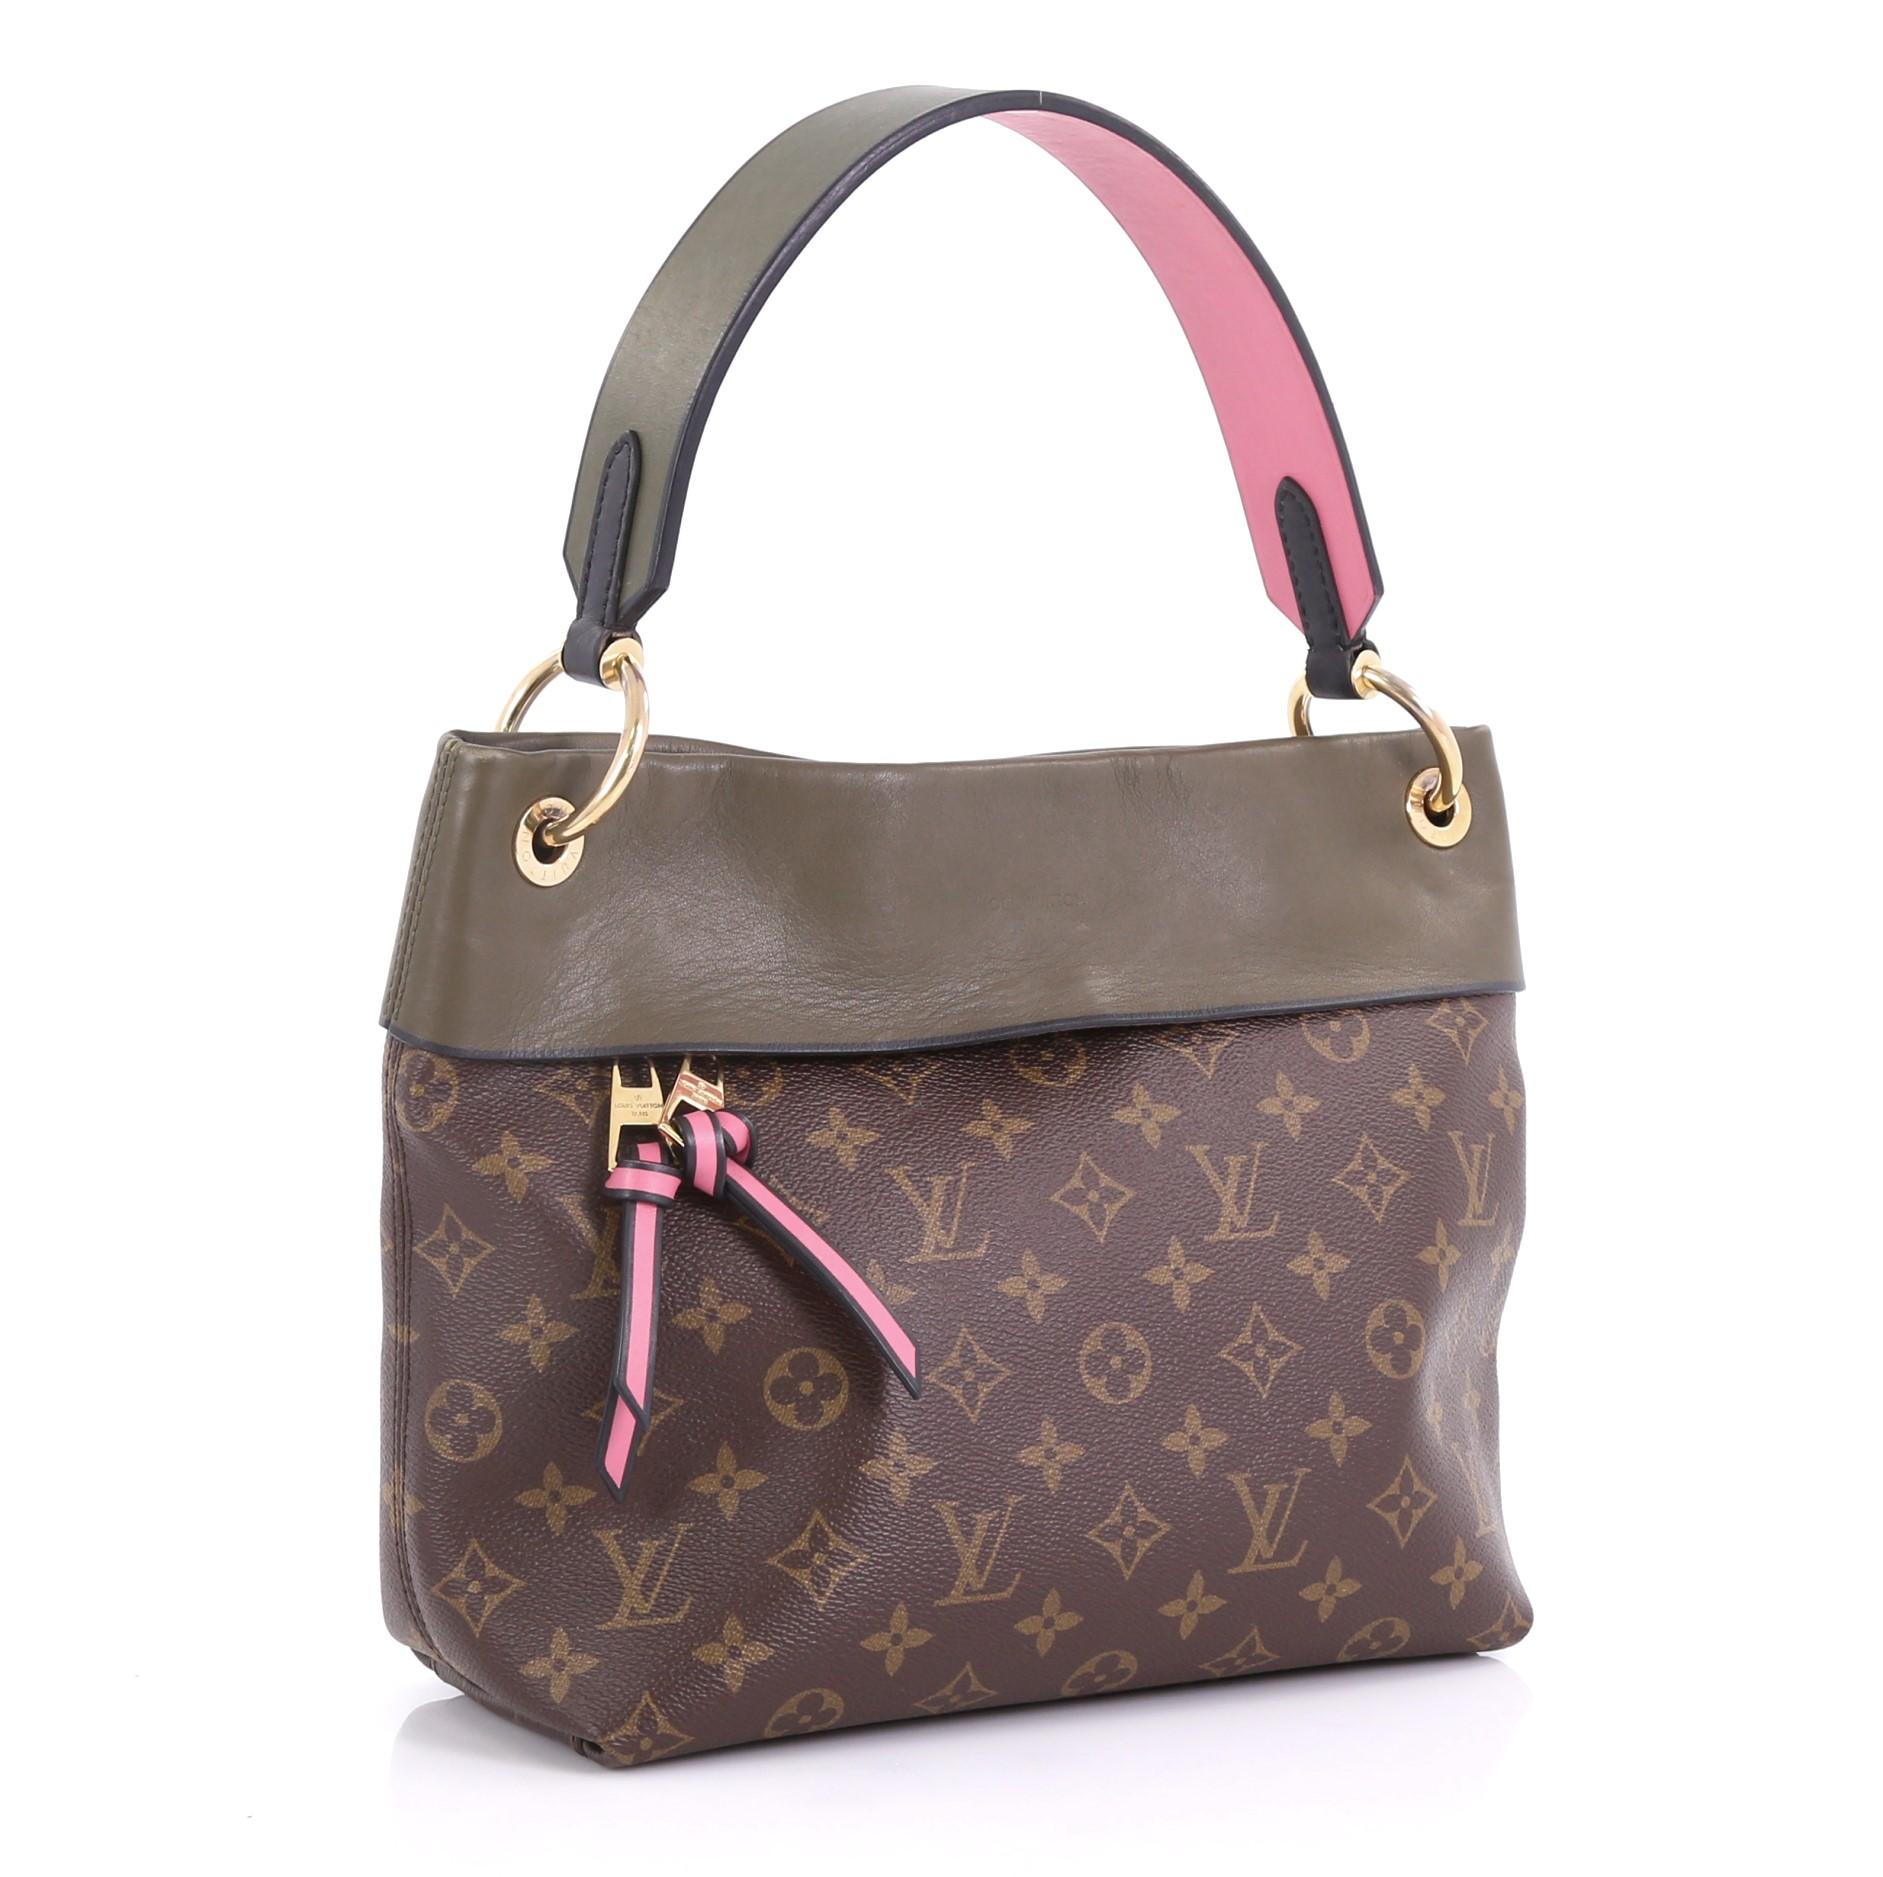 Gray Louis Vuitton Tuileries Besace Bag Monogram Canvas with Leather